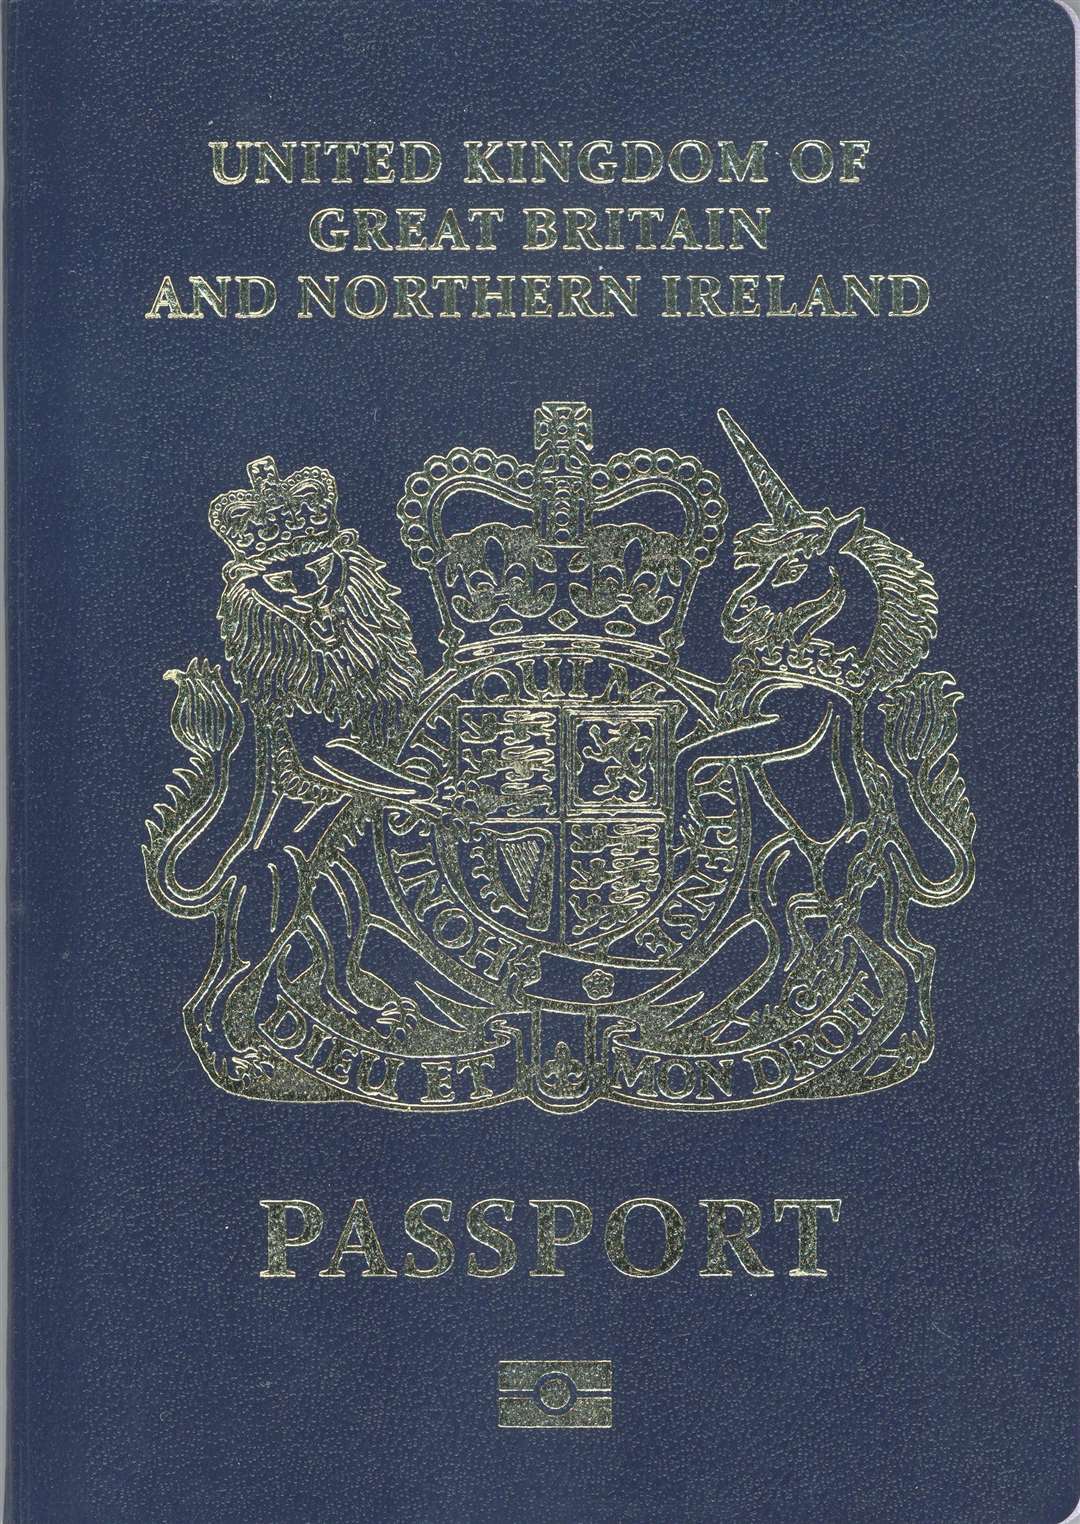 The burgundy coloured passports are also now being replaced with navy ones as they expire